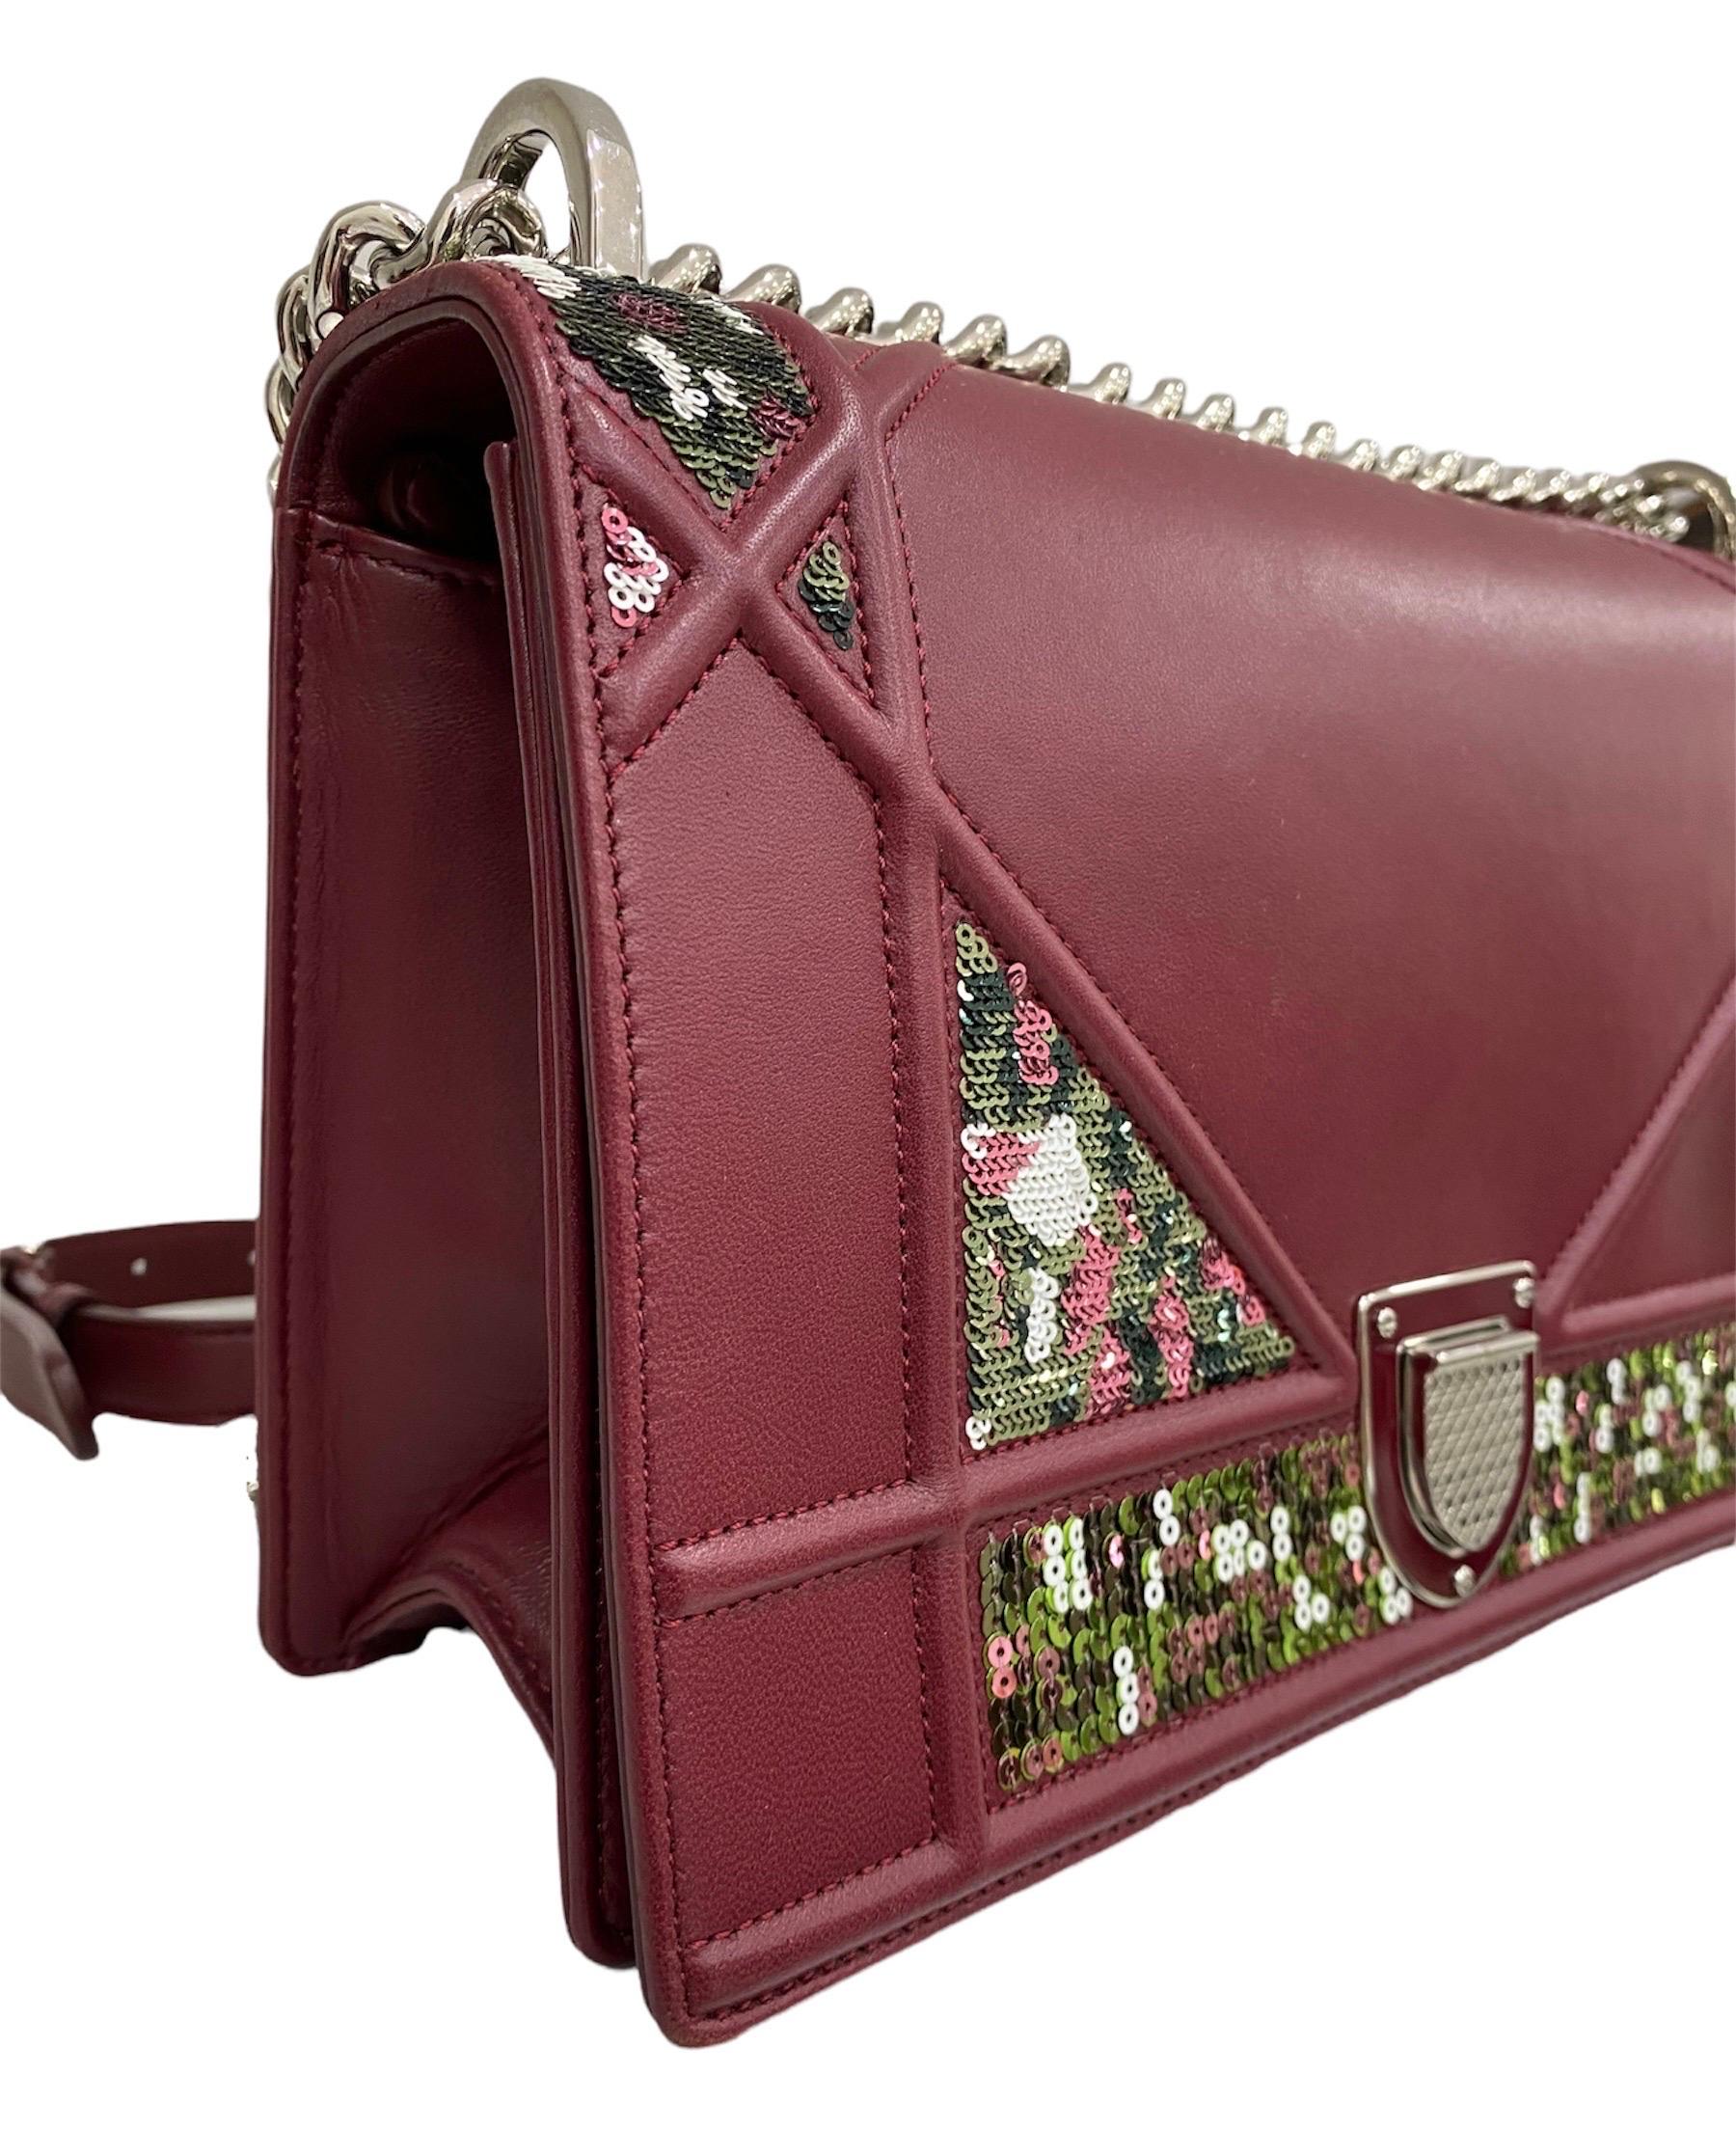 Dior Diorama model shoulder bag in burgundy leather and multicolor sequins with silver hardware.

It has a front flap with interlocking closure. The interiors are lined in green leather and is equipped with internal pockets including one with zip